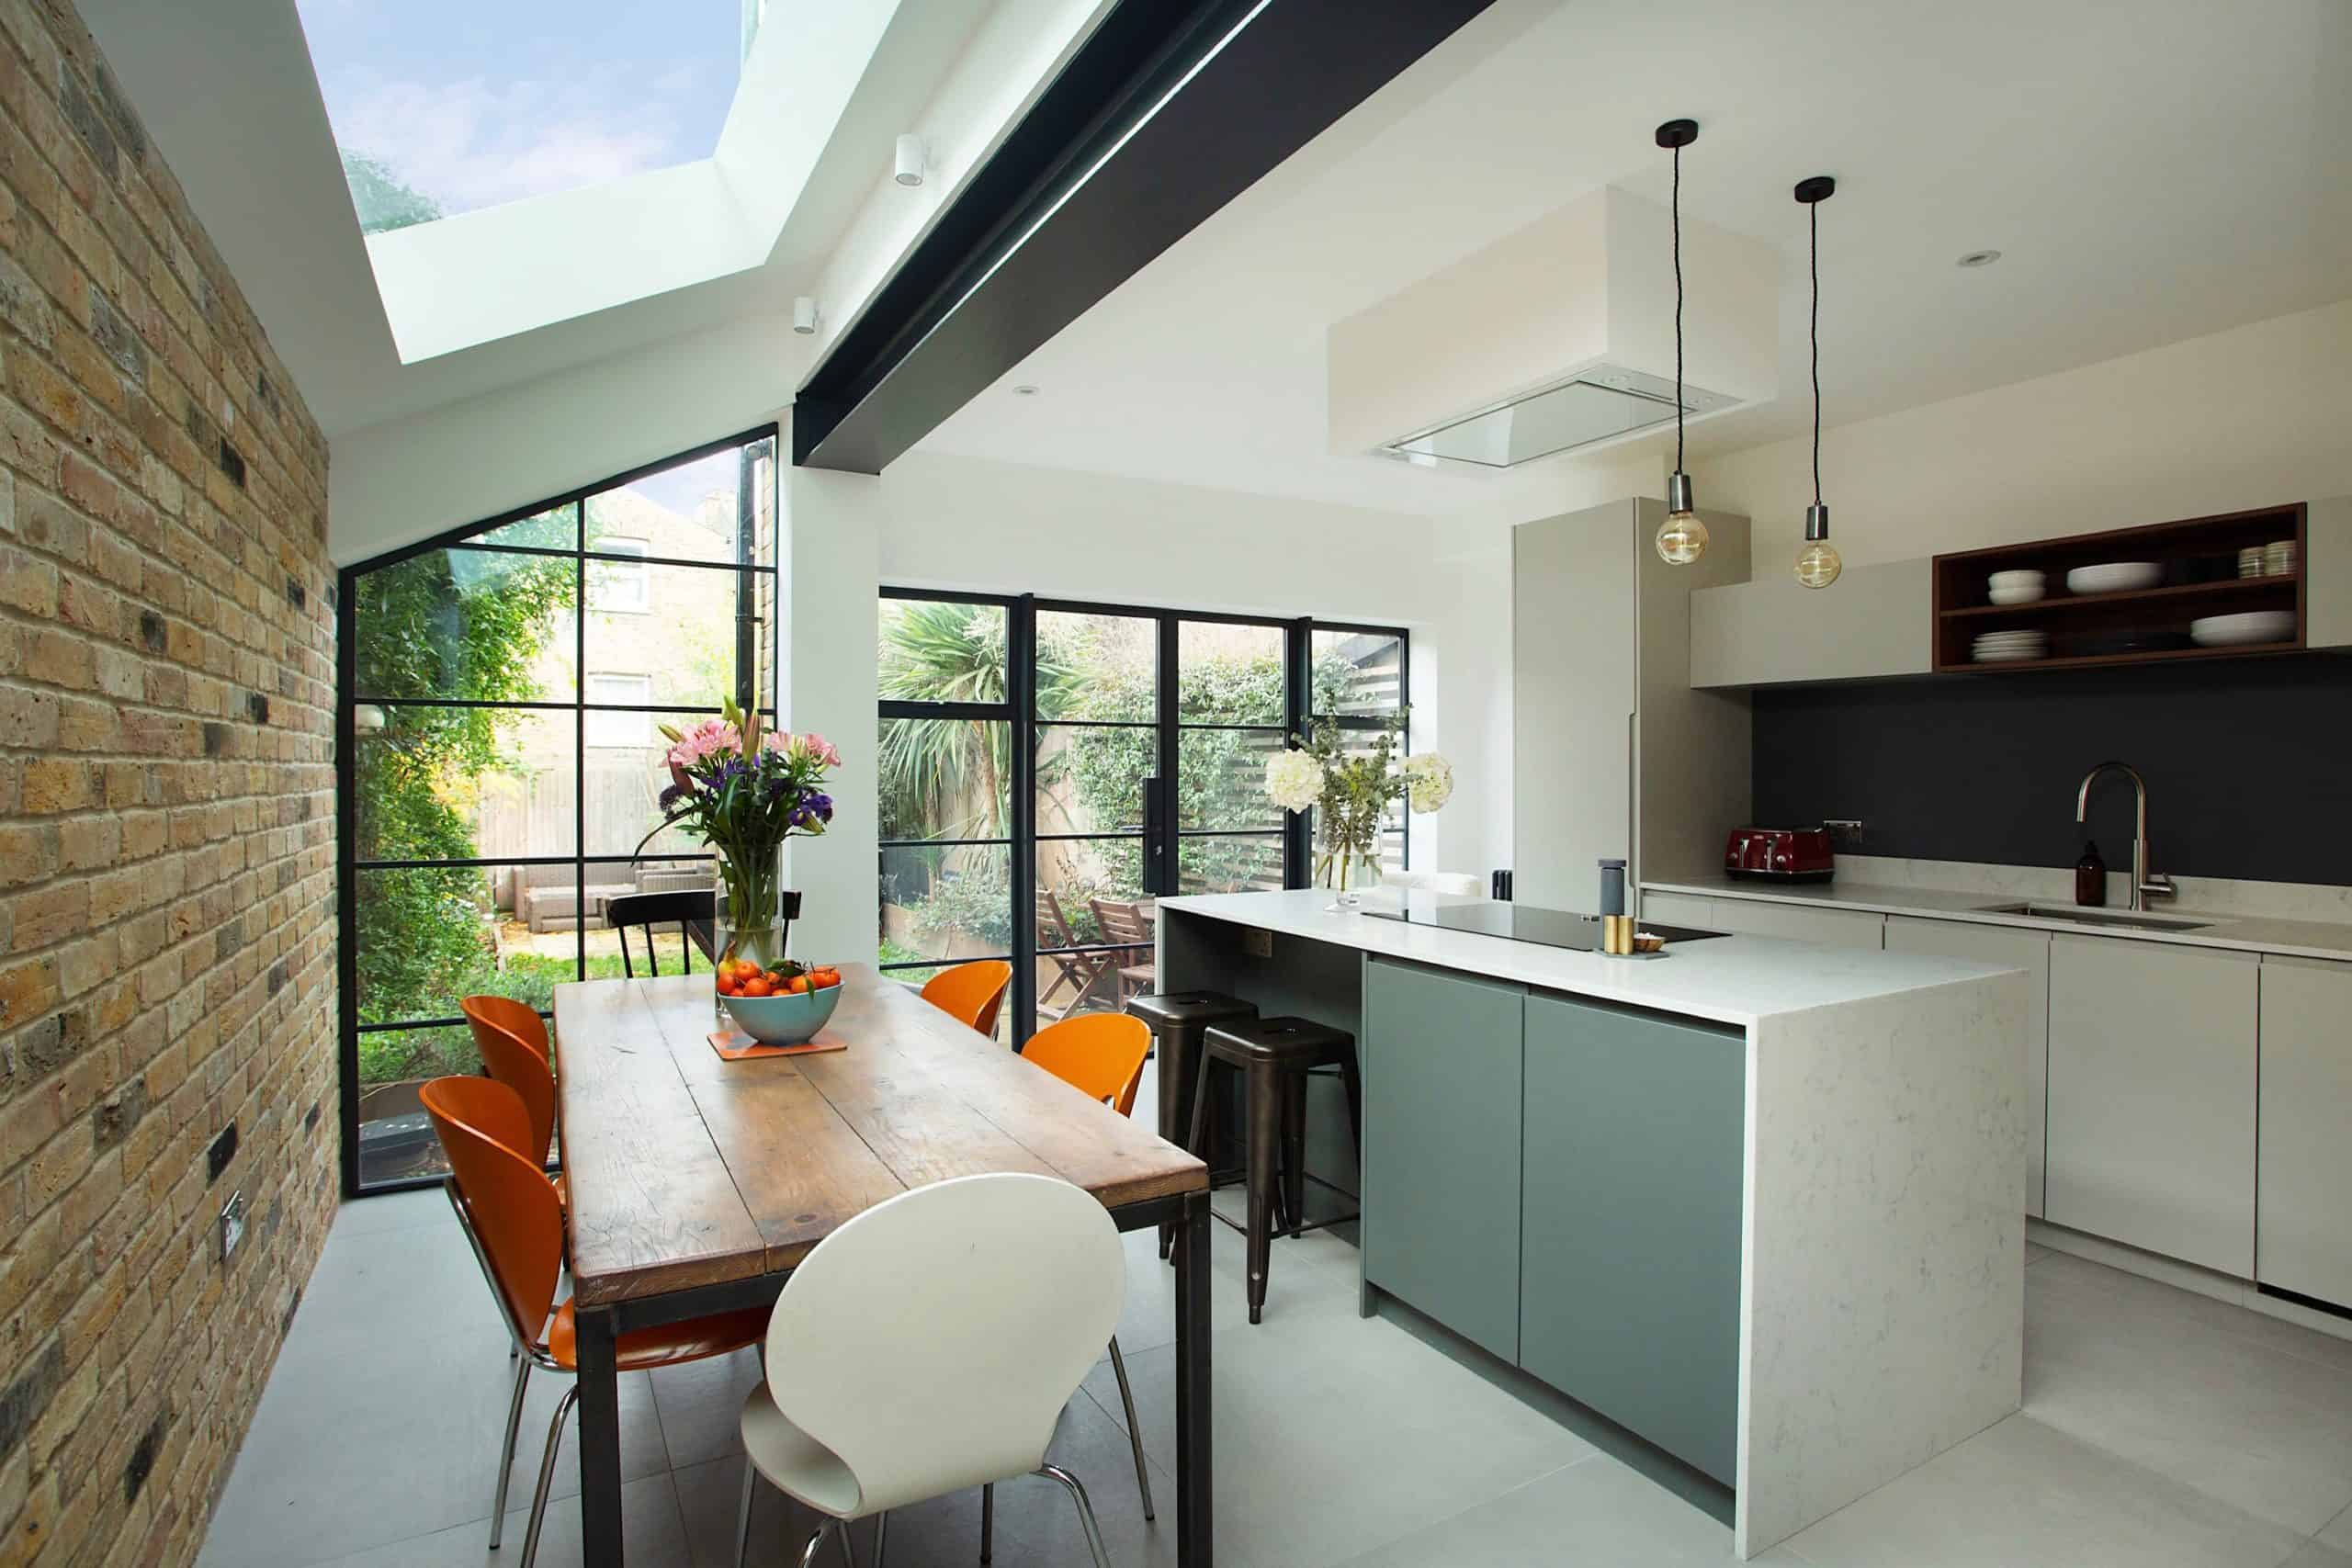 Side return extension ideas – create a more spacious kitchen in terraced houses and more